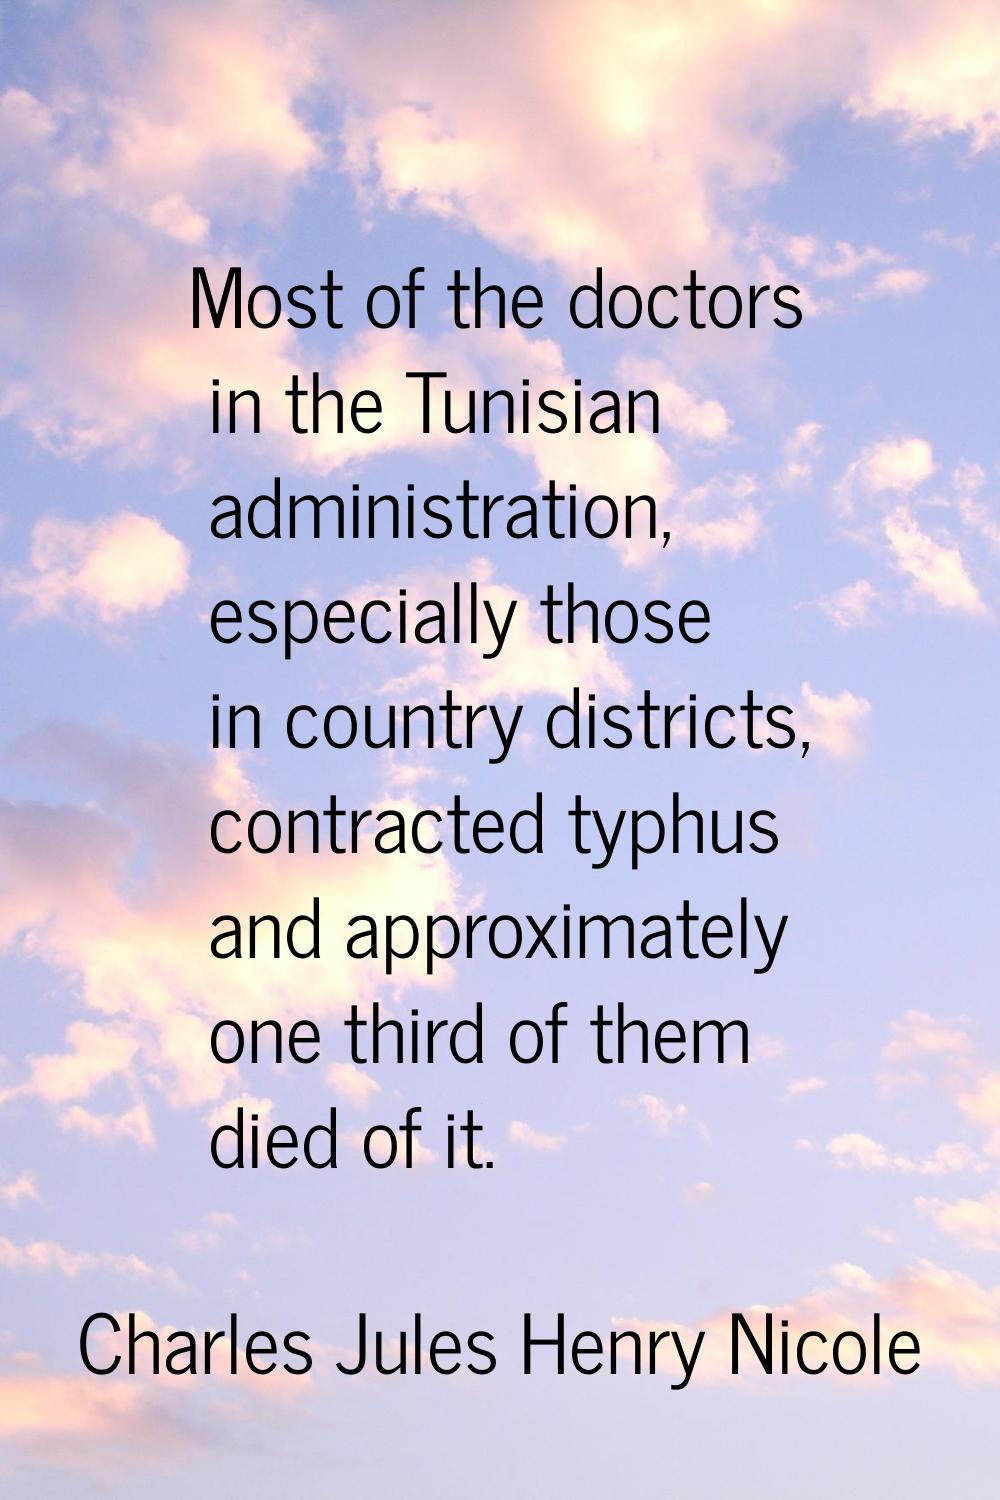 Most of the doctors in the Tunisian administration, especially those in country districts, contract